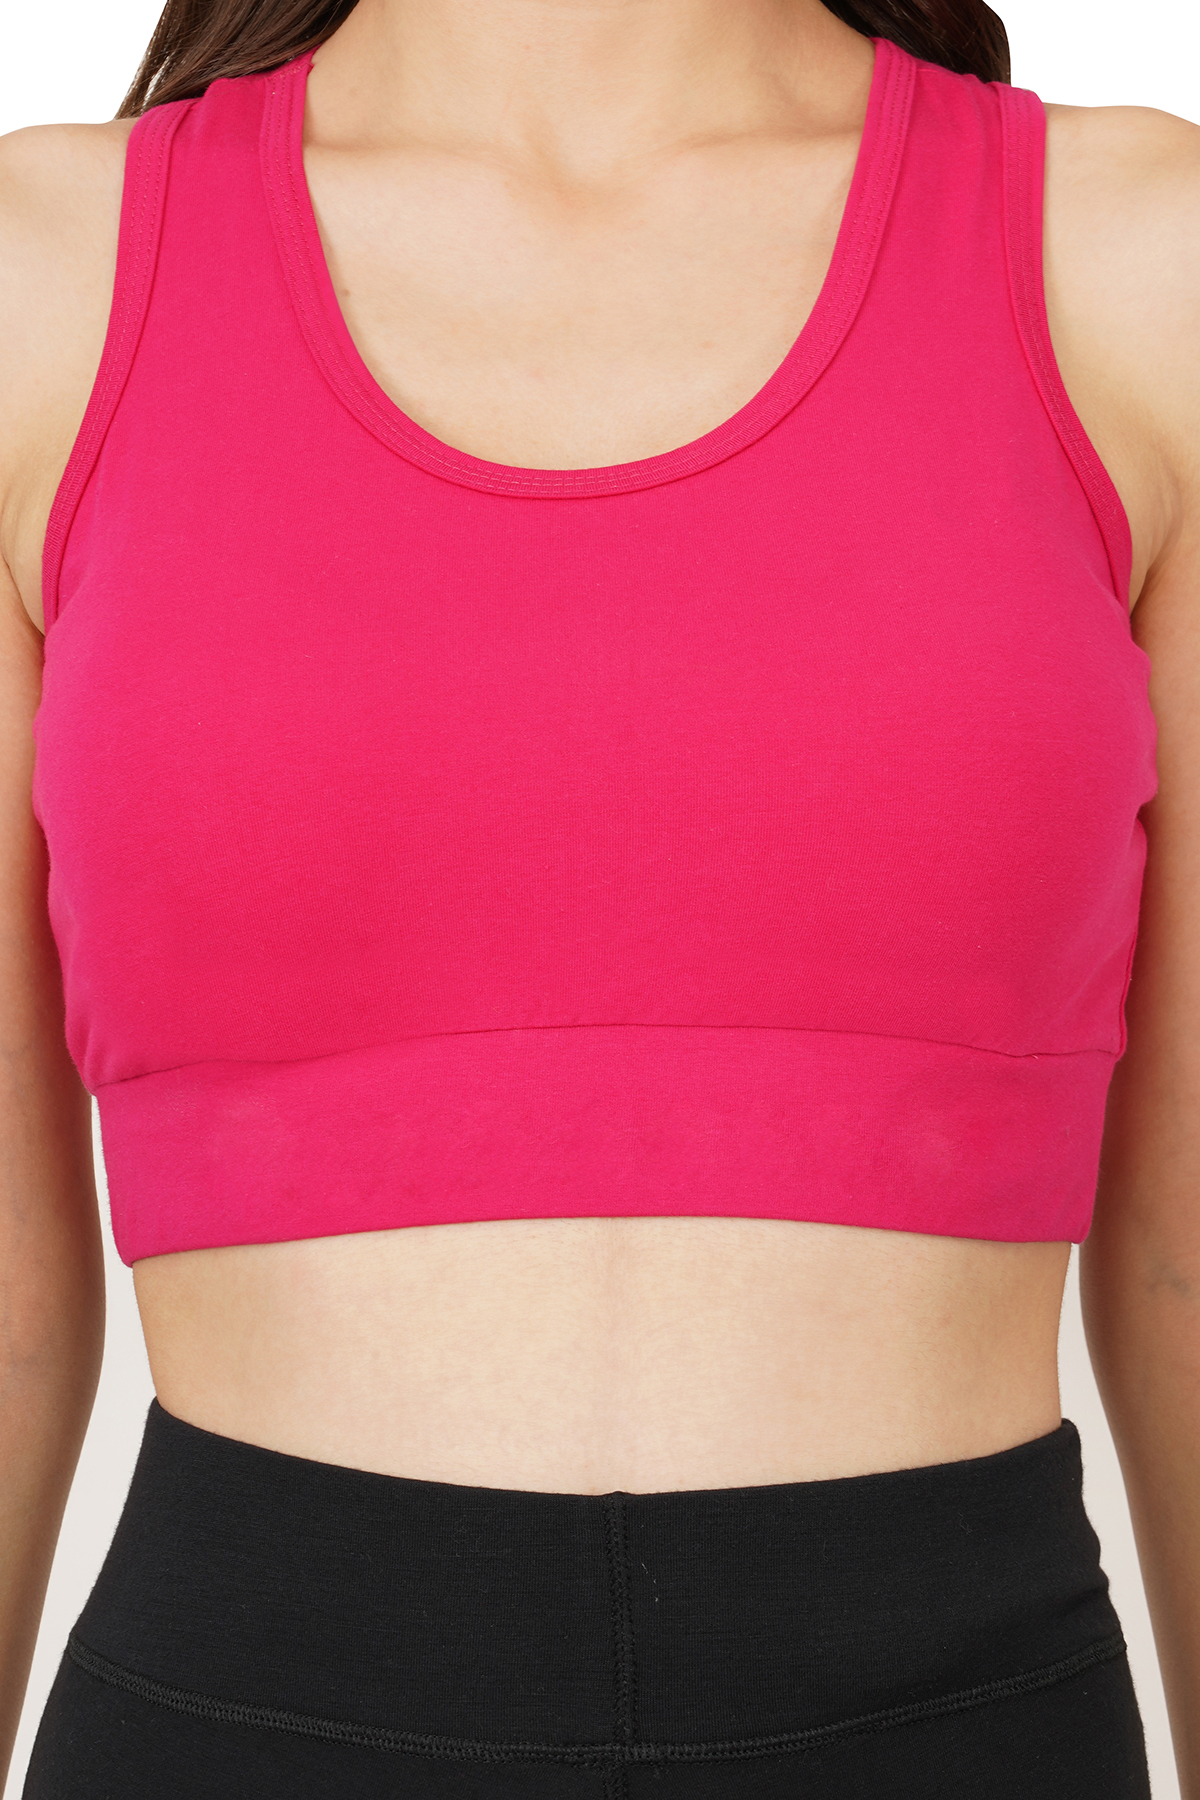 Product: BAMBOO FABRIC SPORTS BRA | CLEAN | Size S